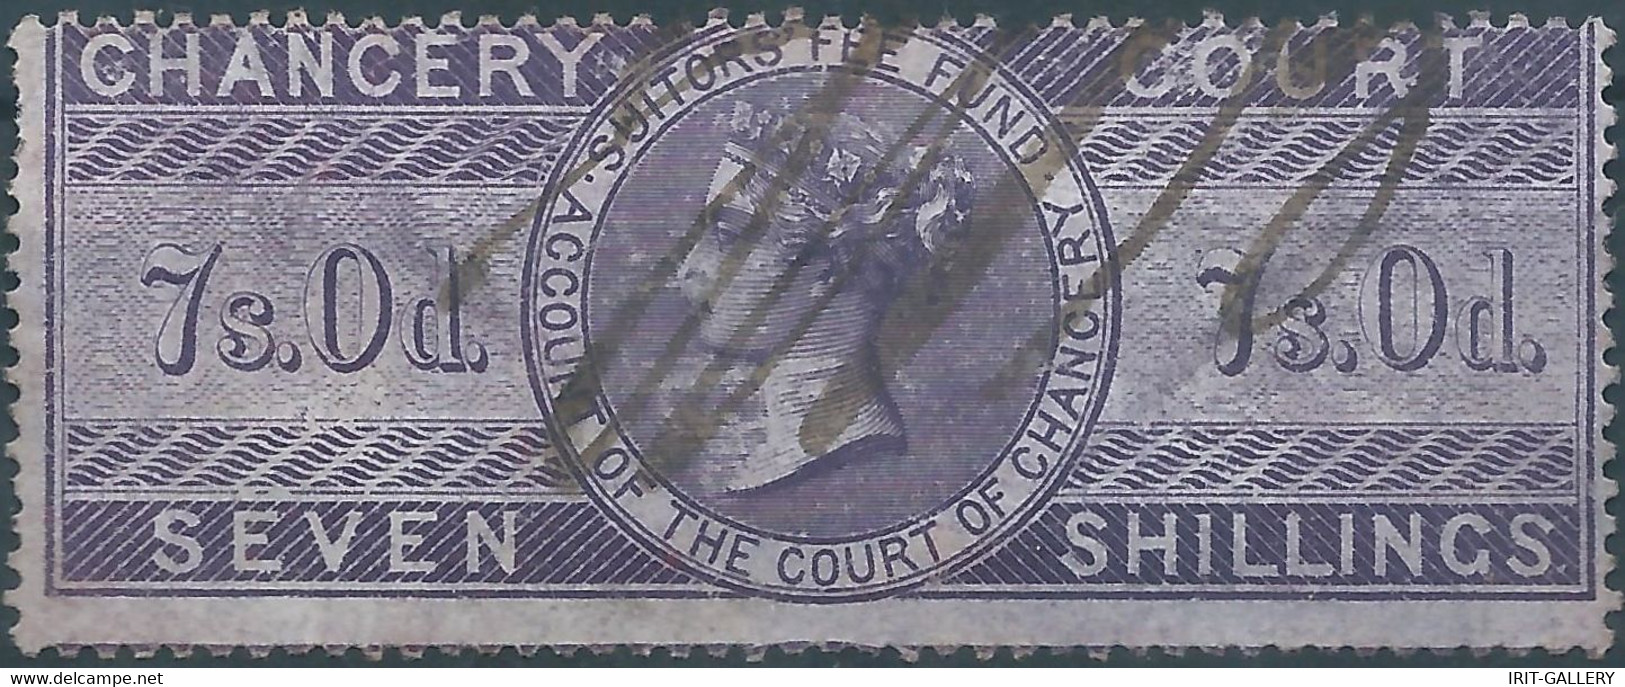 Great Britain-ENGLAND,Queen Victoria,1855 /1870 Revenue Stamp Tax Fiscal CHANCERY COURT,7s.0d. Seven Shillings,Used - Revenue Stamps